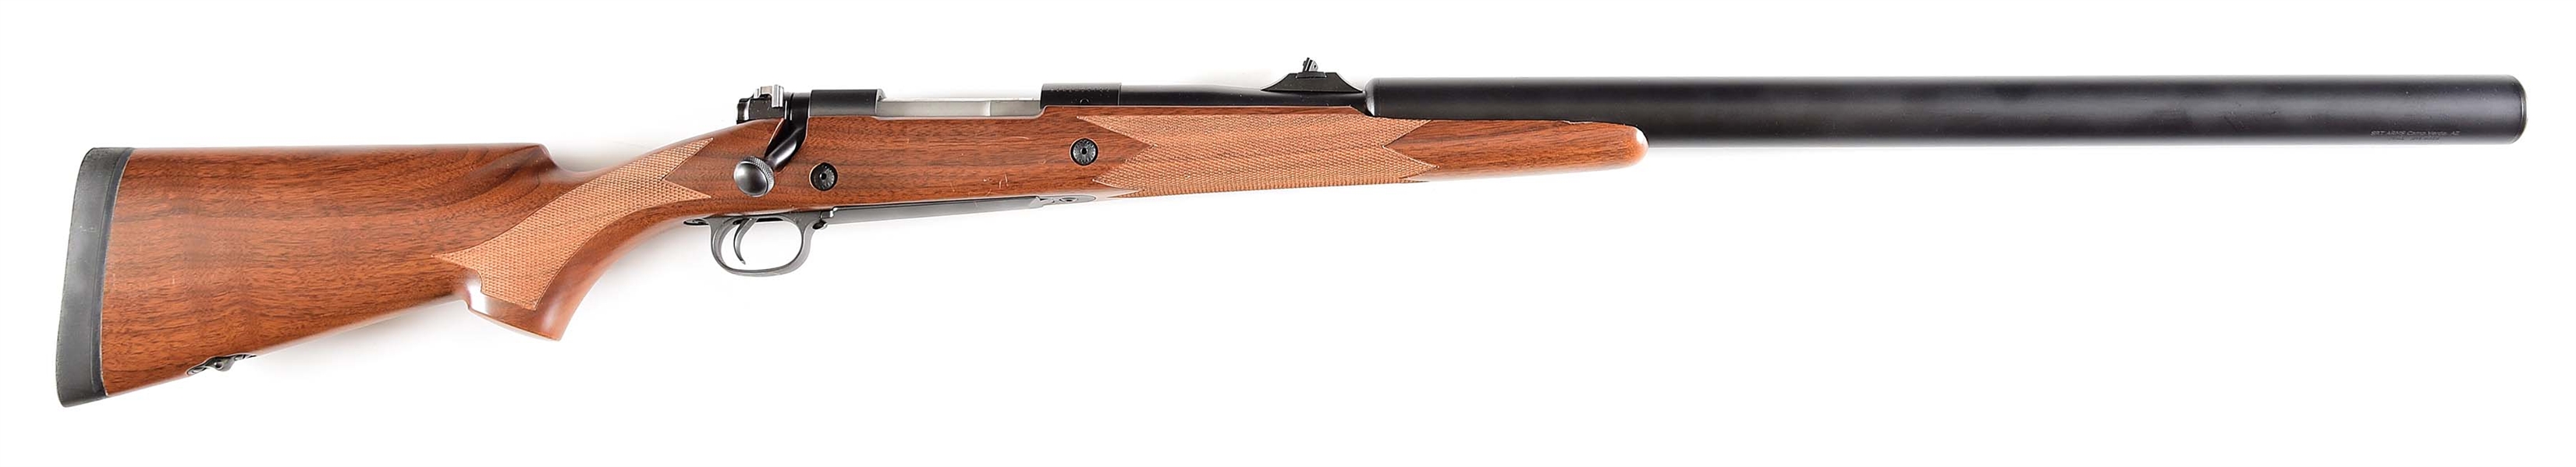 (N) WINCHESTER MODEL 70 .458 WINCHESTER MAGNUM BOLT ACTION RIFLE WITH INTEGRAL SRT ARMS SILENCER (SILENCER).